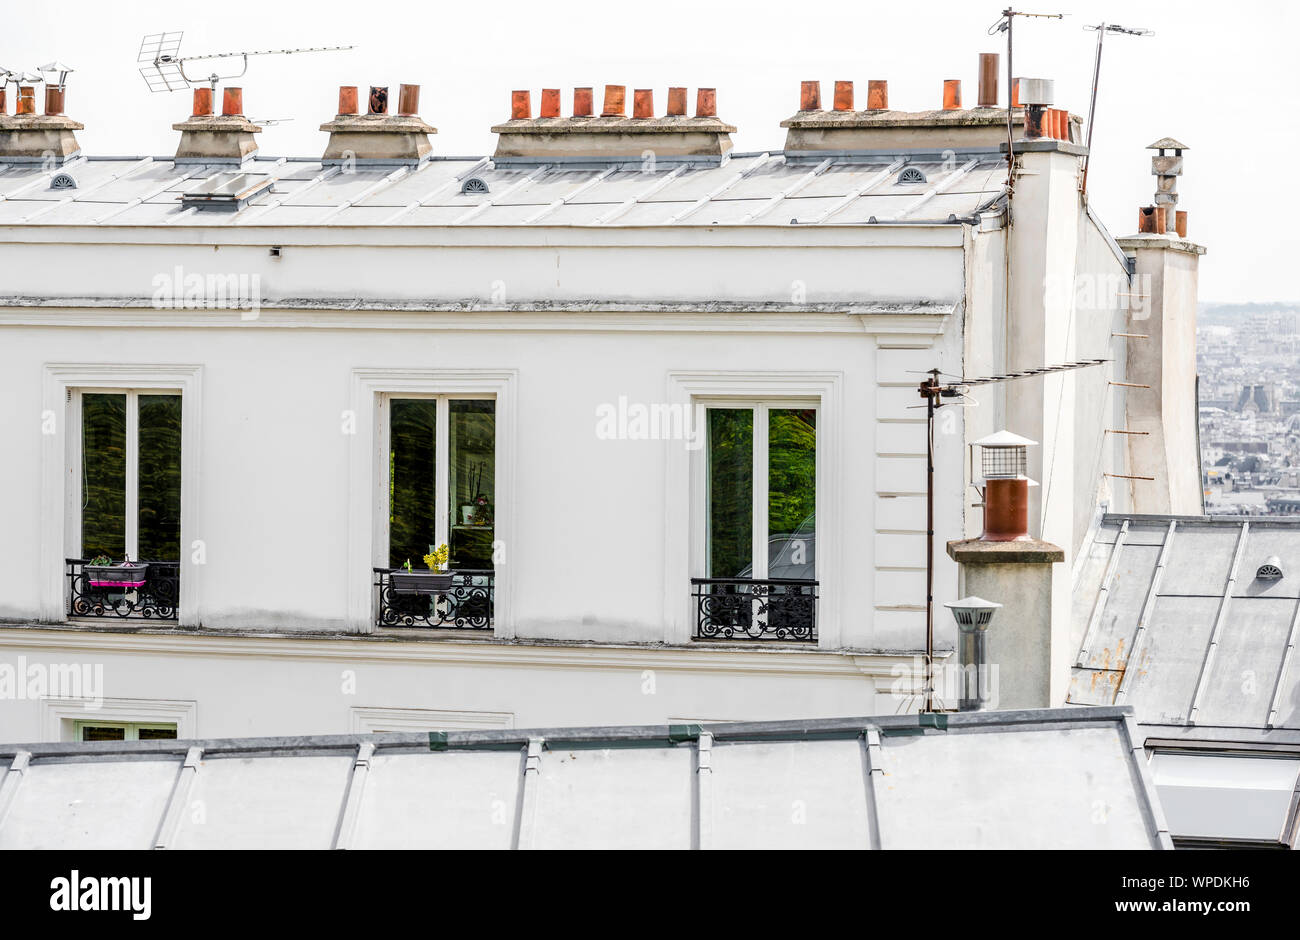 Hanging flower pots in the windows of the attic floor and on the balcony of multistory apartment building - a classic architectural design of old Pari Stock Photo